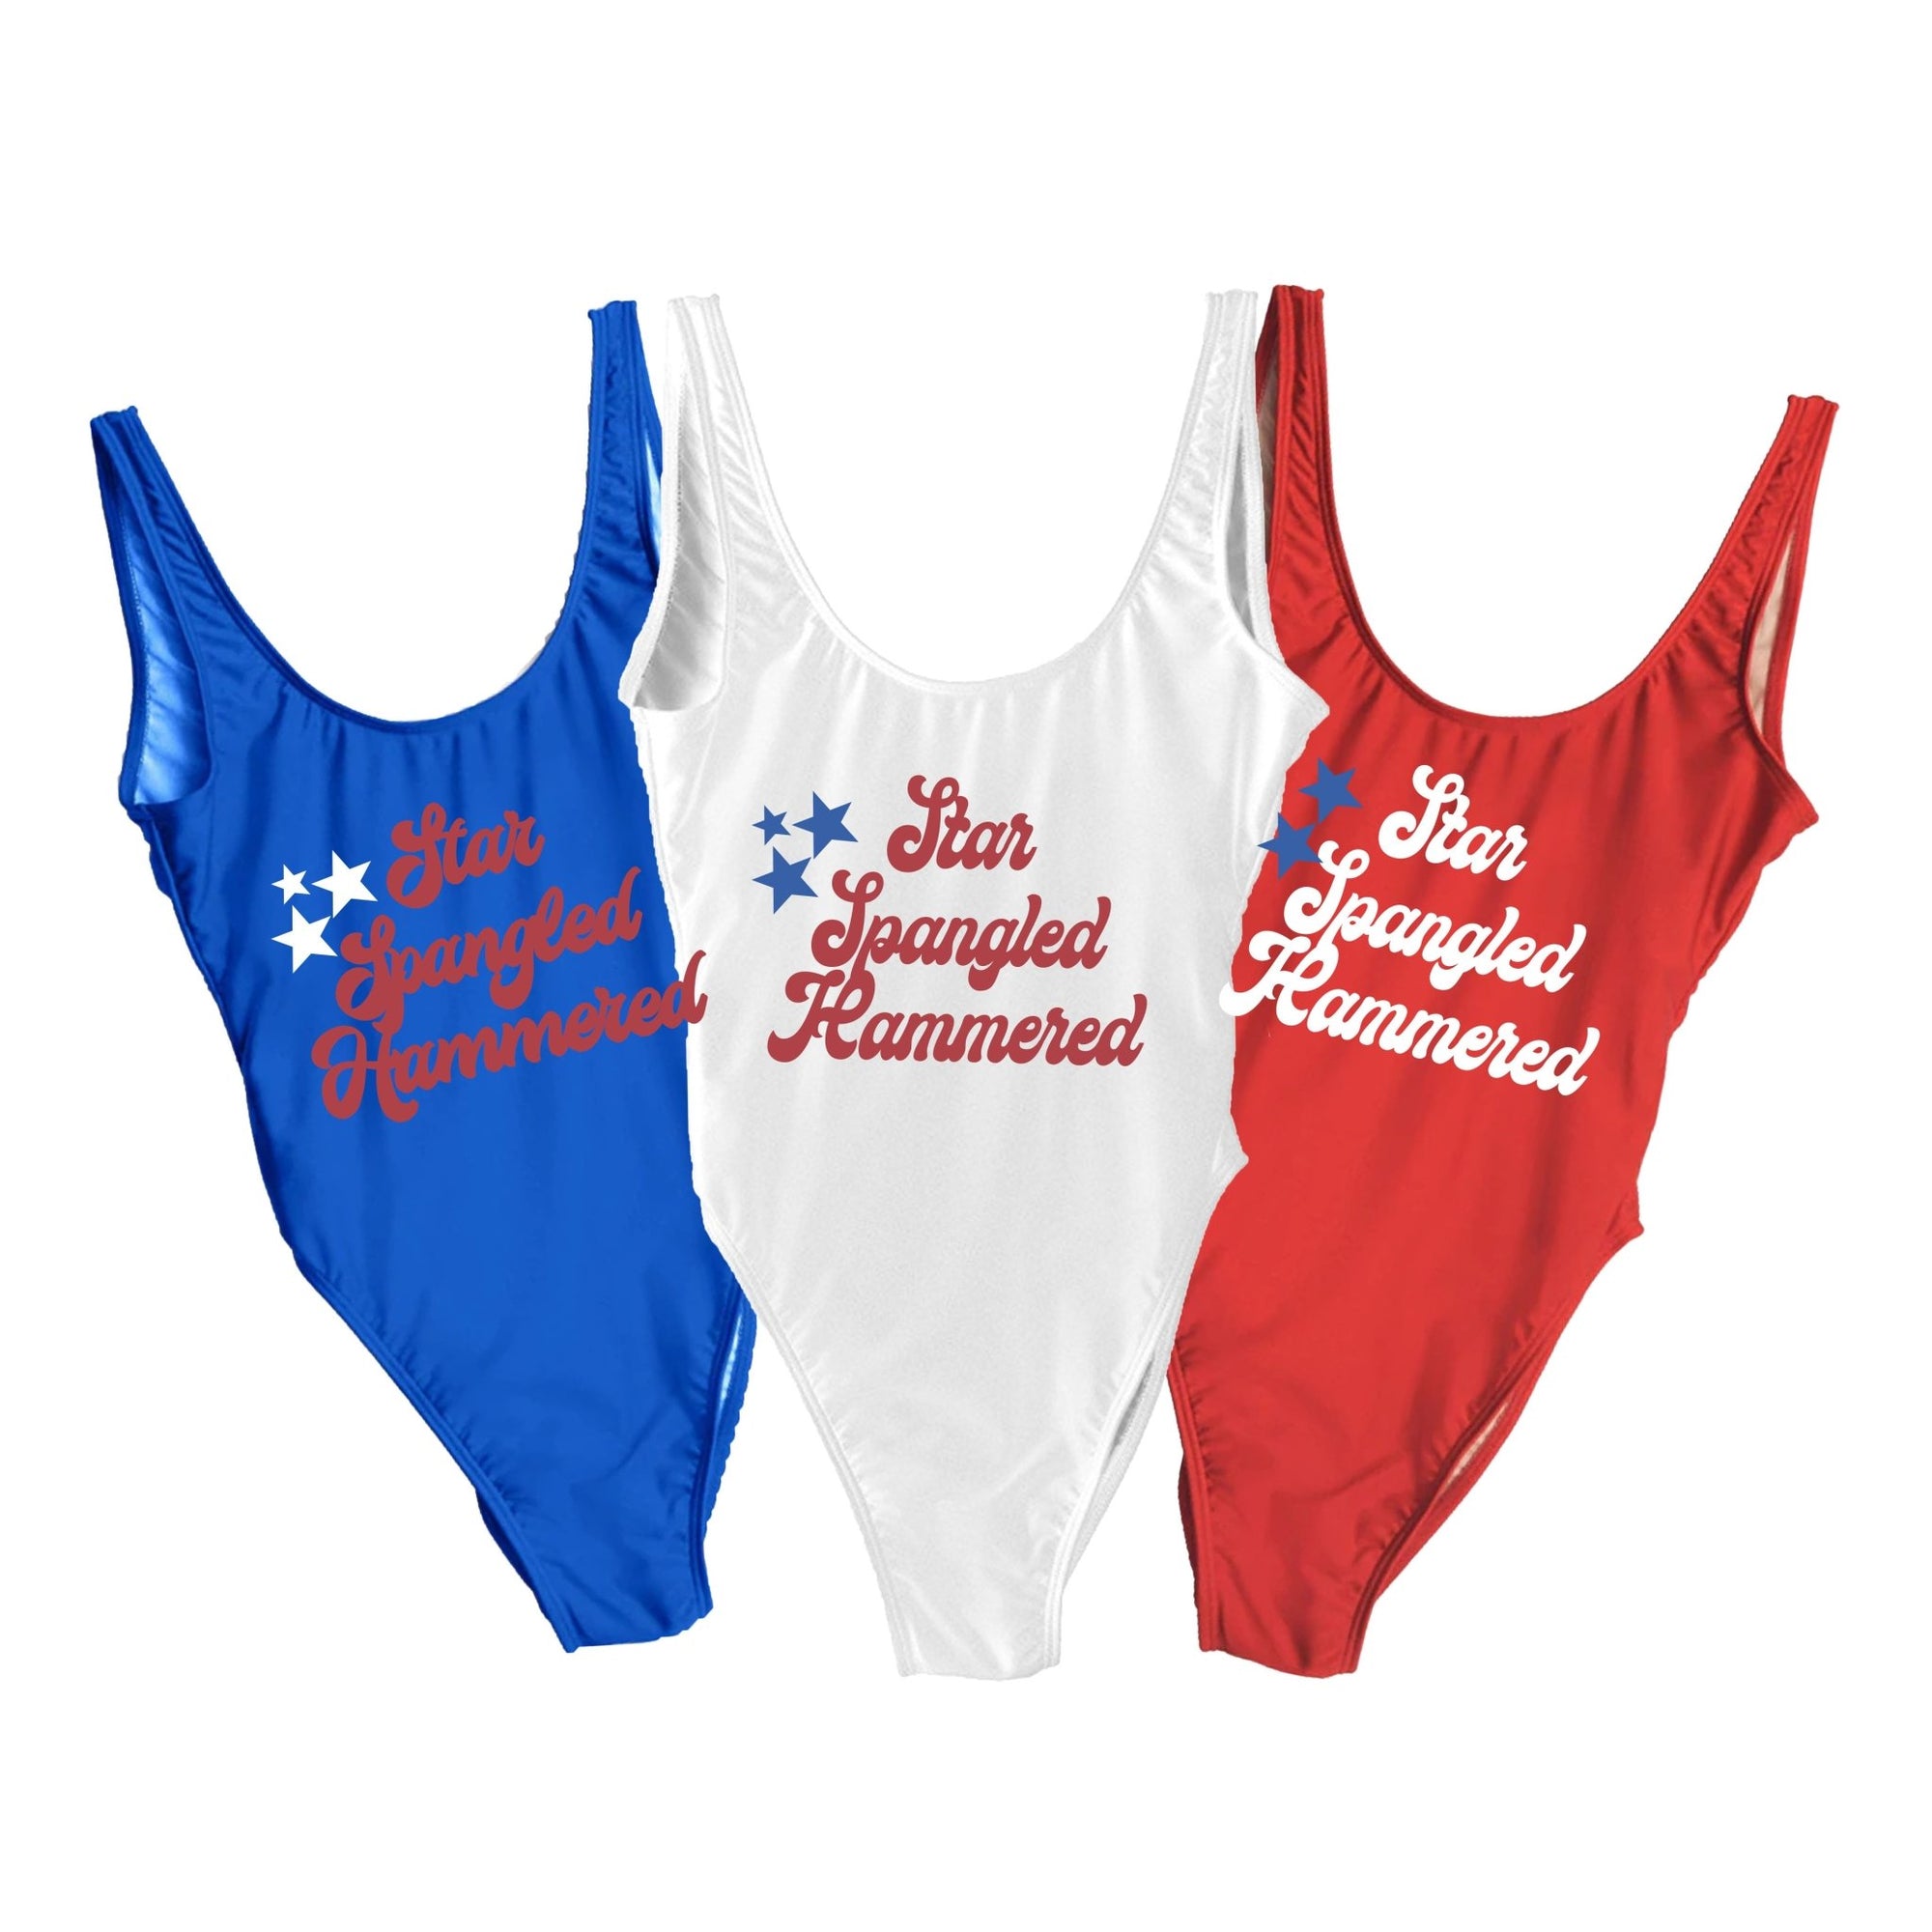 Red, white, and blue swimsuits that read "Star Spangled Hammered"